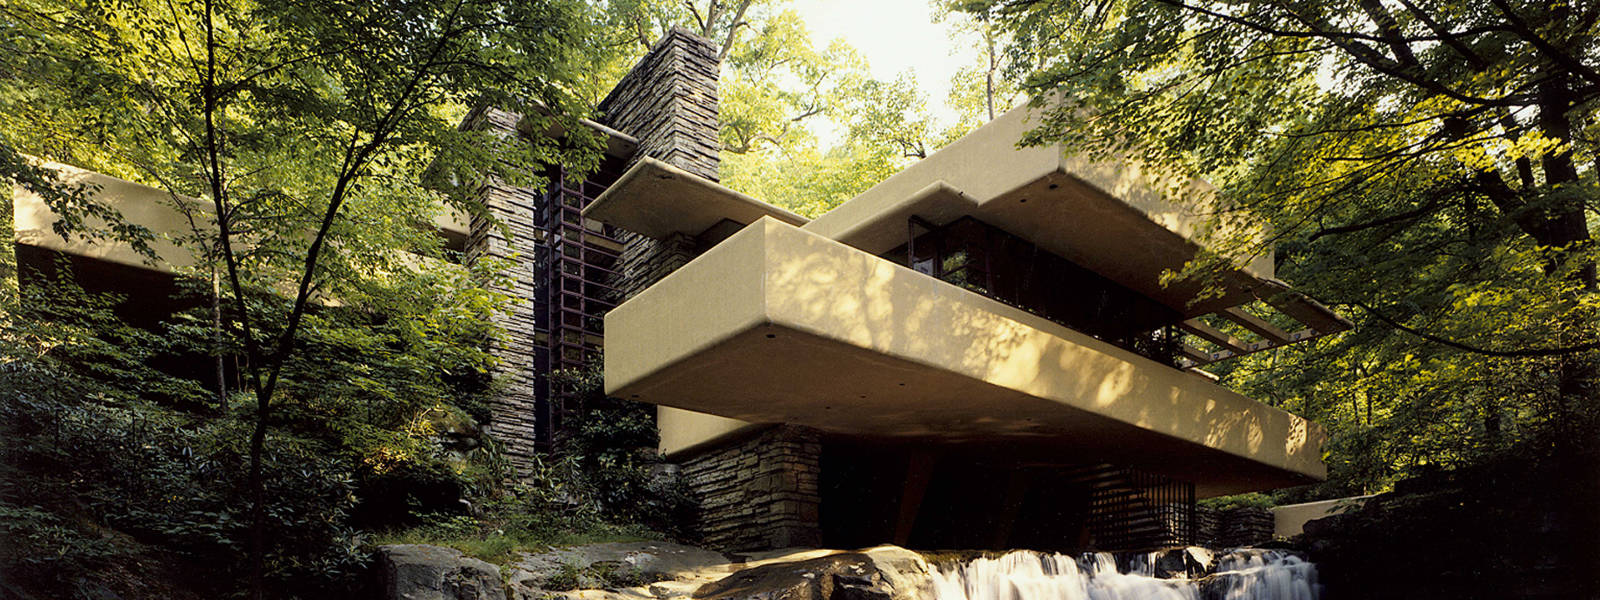 Fallingwater Installation: Large Vase from Modern Made Leisure by Charles Lutz